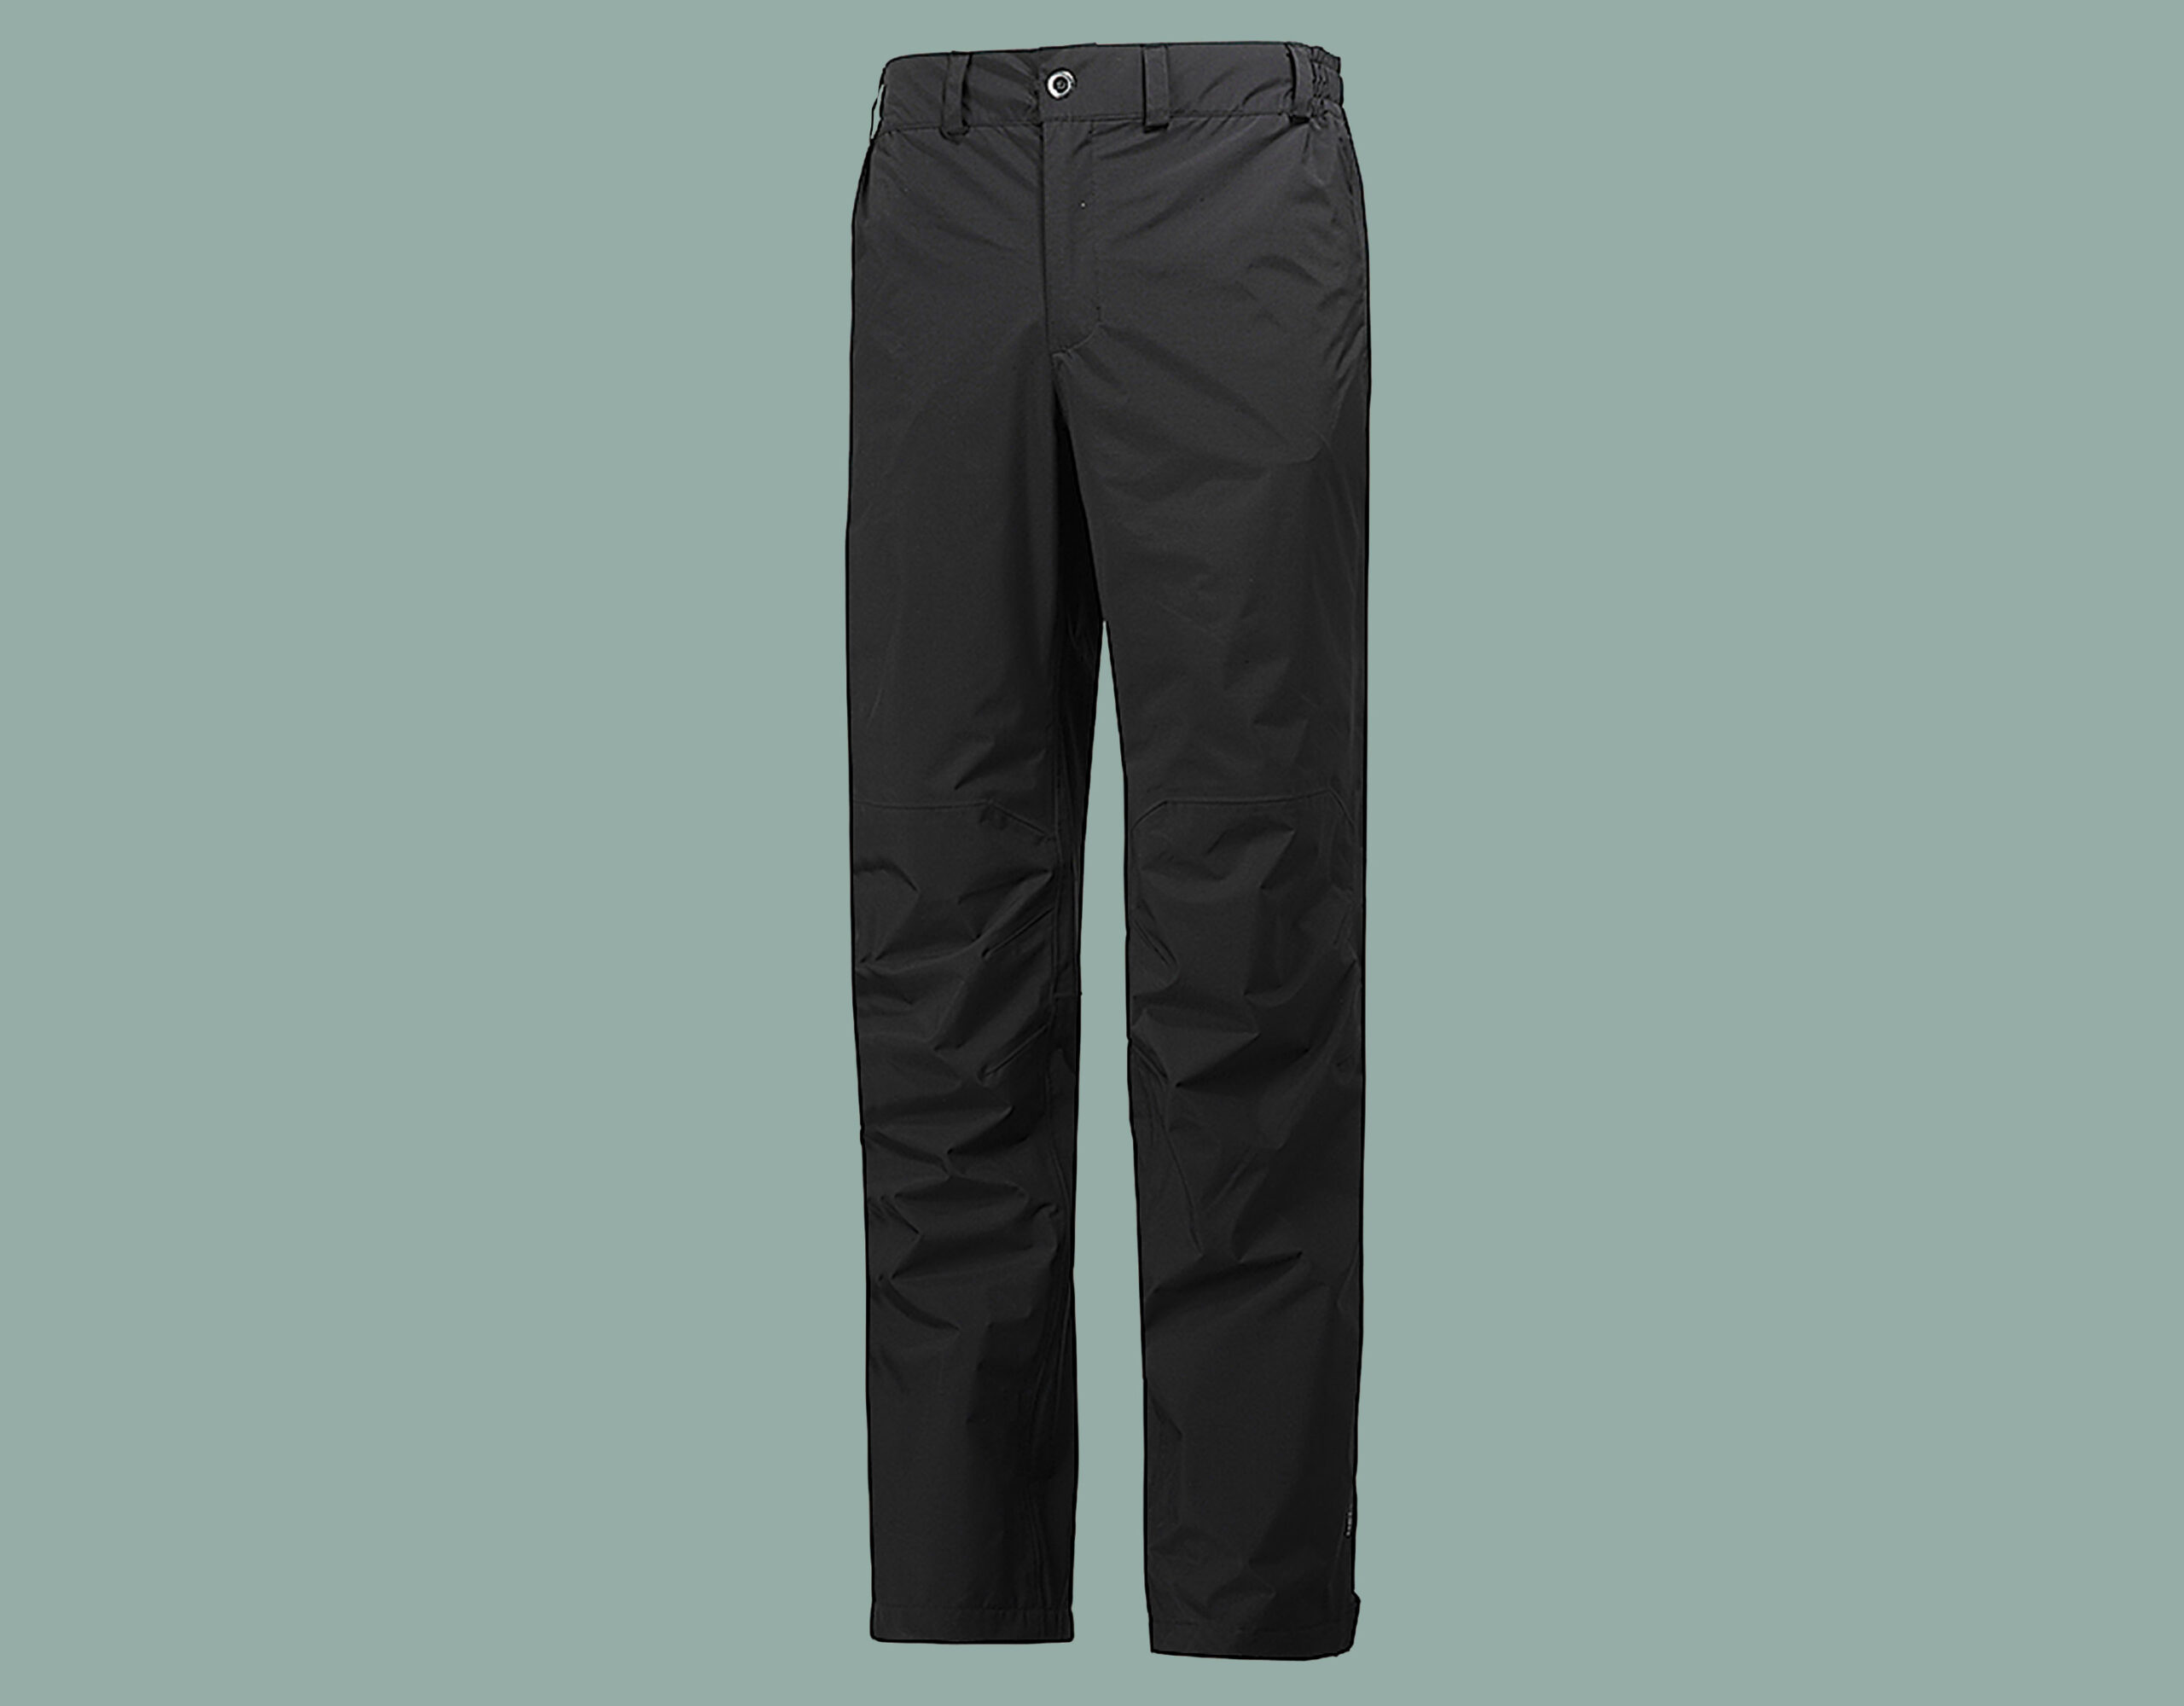 Review: Helly Hansen Packable Pant Waterproof Trousers